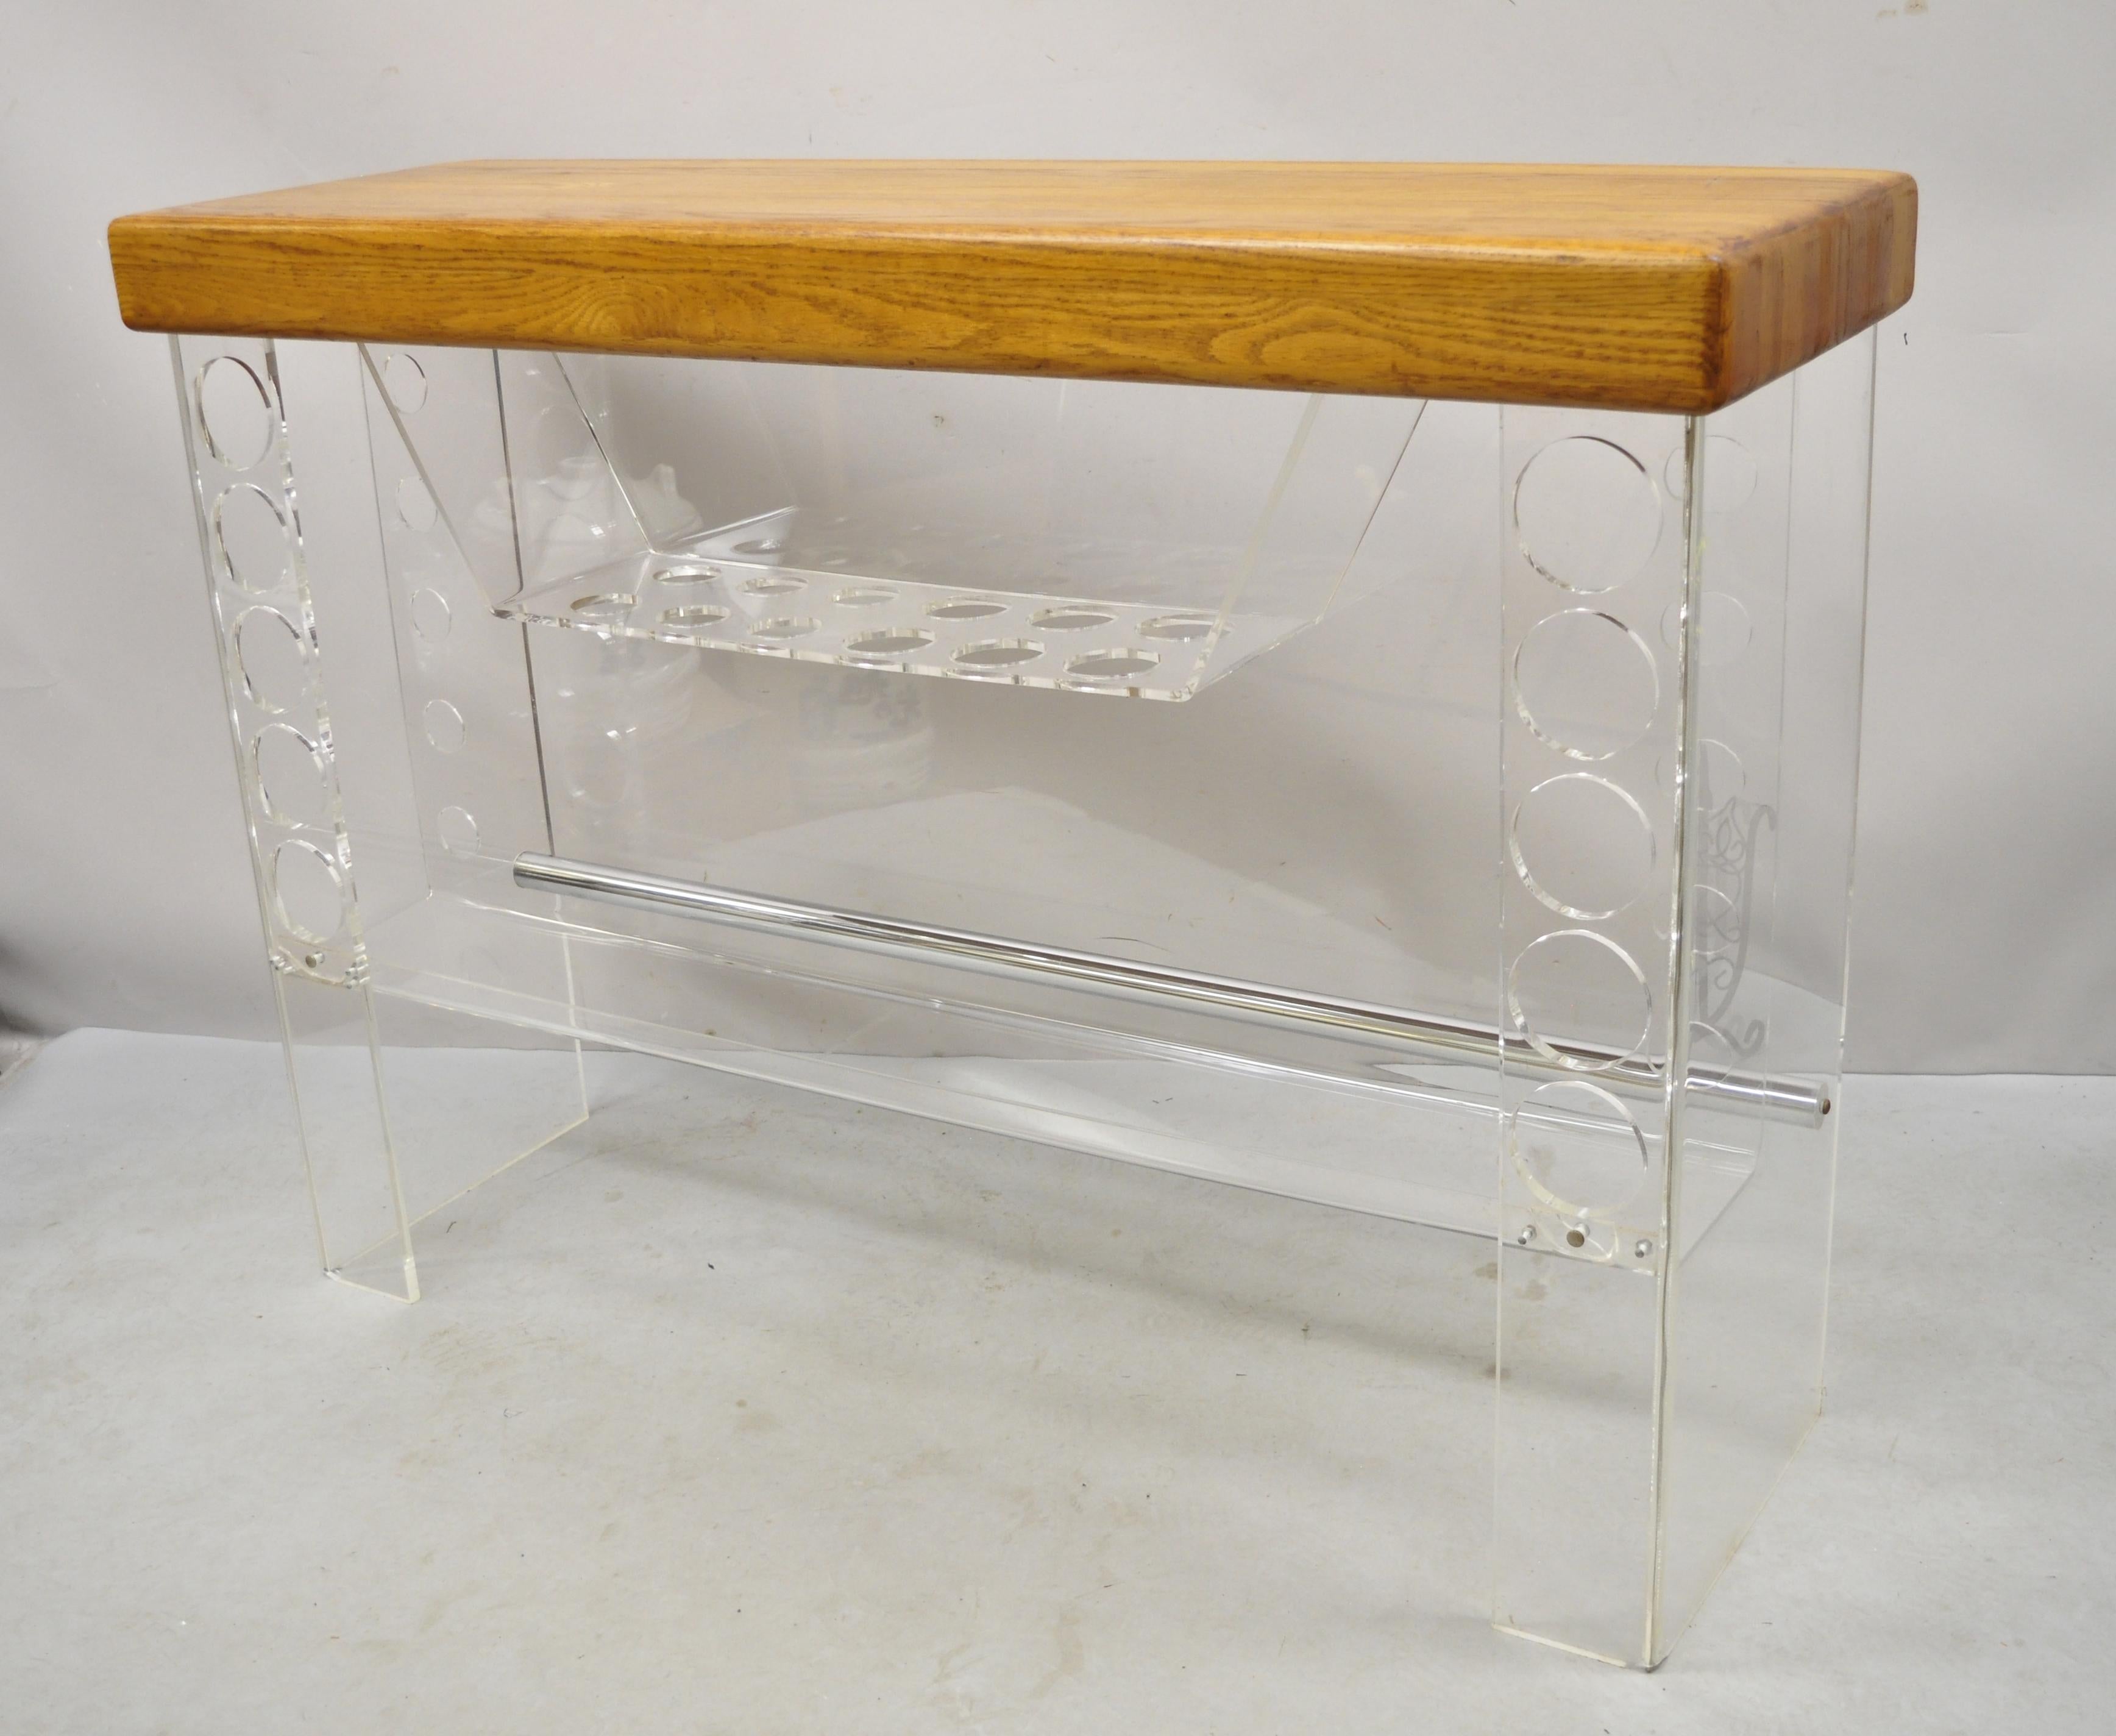 Mid Century Modern Lucite and Oak Wood Butcher Block Top Wine Bar. Item features. Thick butcher block wooden top, lucite base, wine bottle holders to base, very nice vintage item, great style and form, attributed to Luigi Bardini for Hill Mfg. Circa